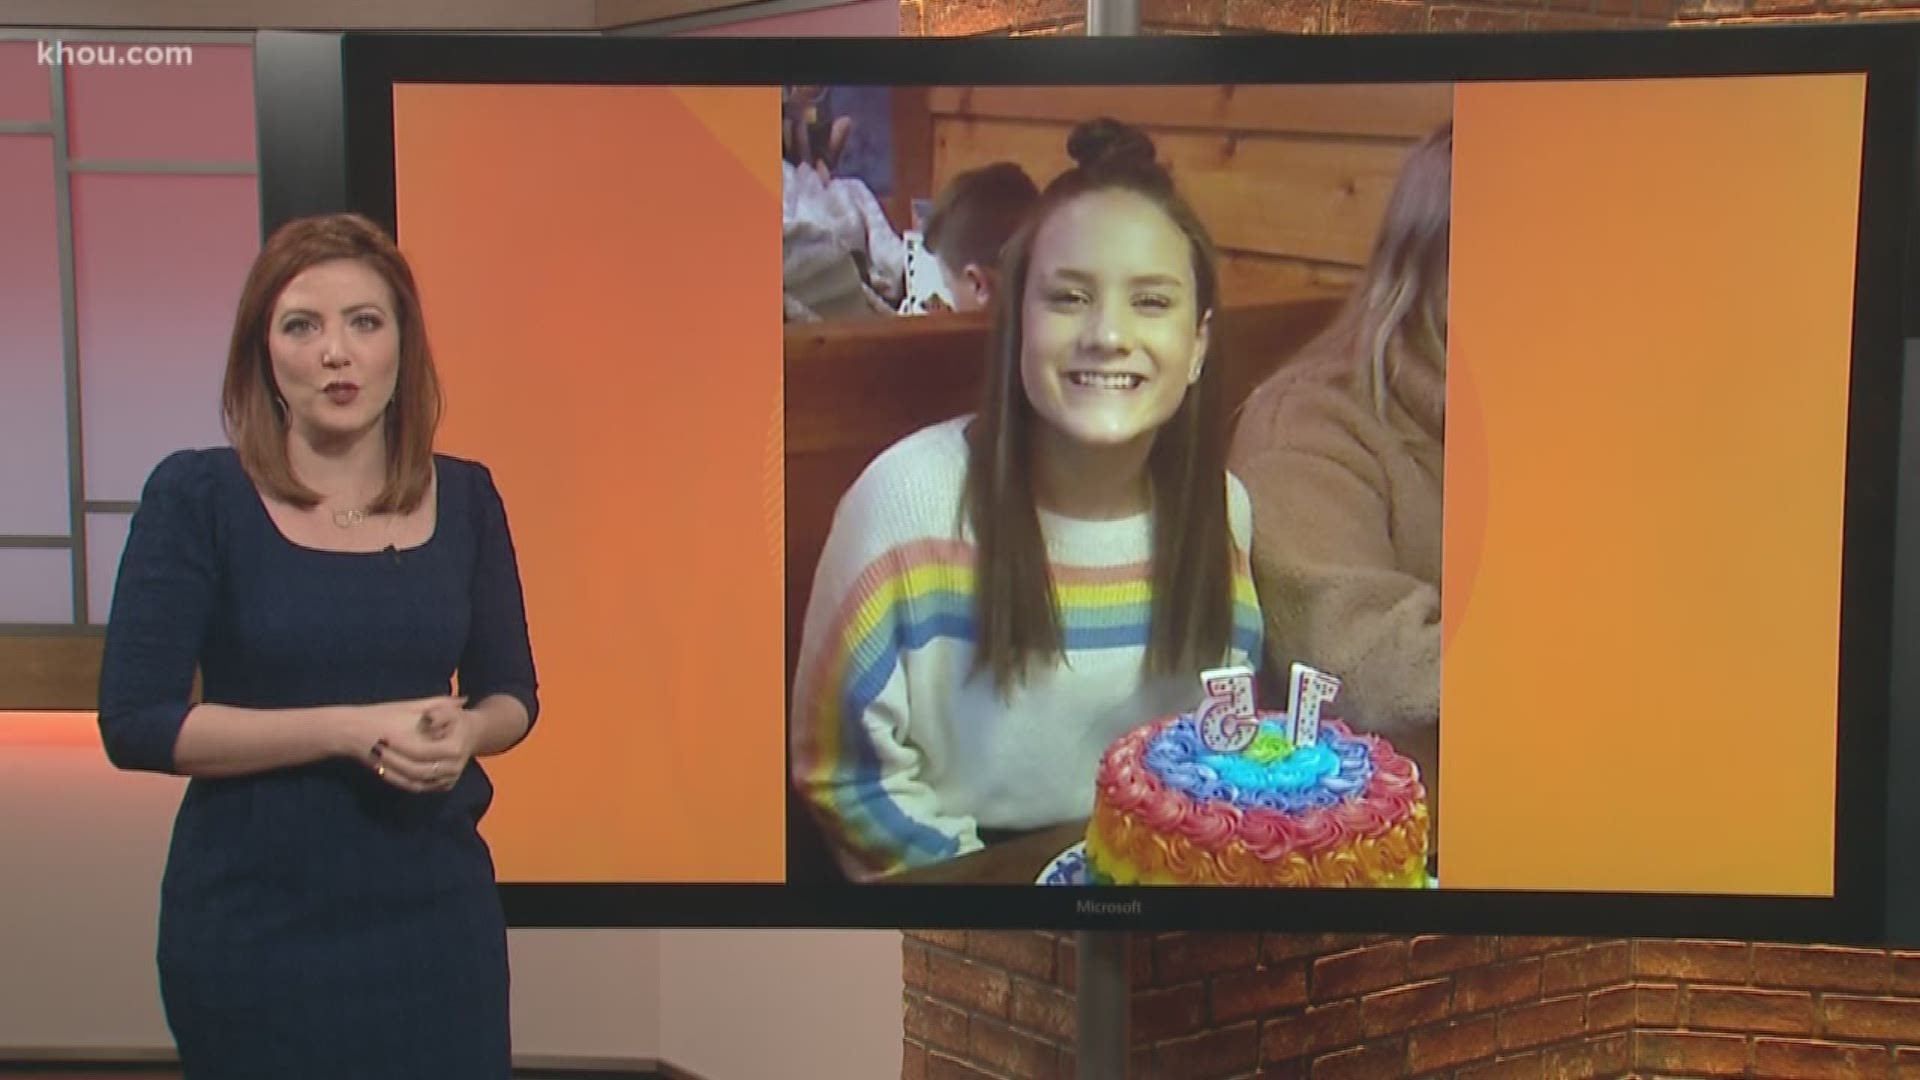 A student at a private Christian school, was expelled after posting a photo on social media that featured her in a rainbow shirt with a rainbow cake.